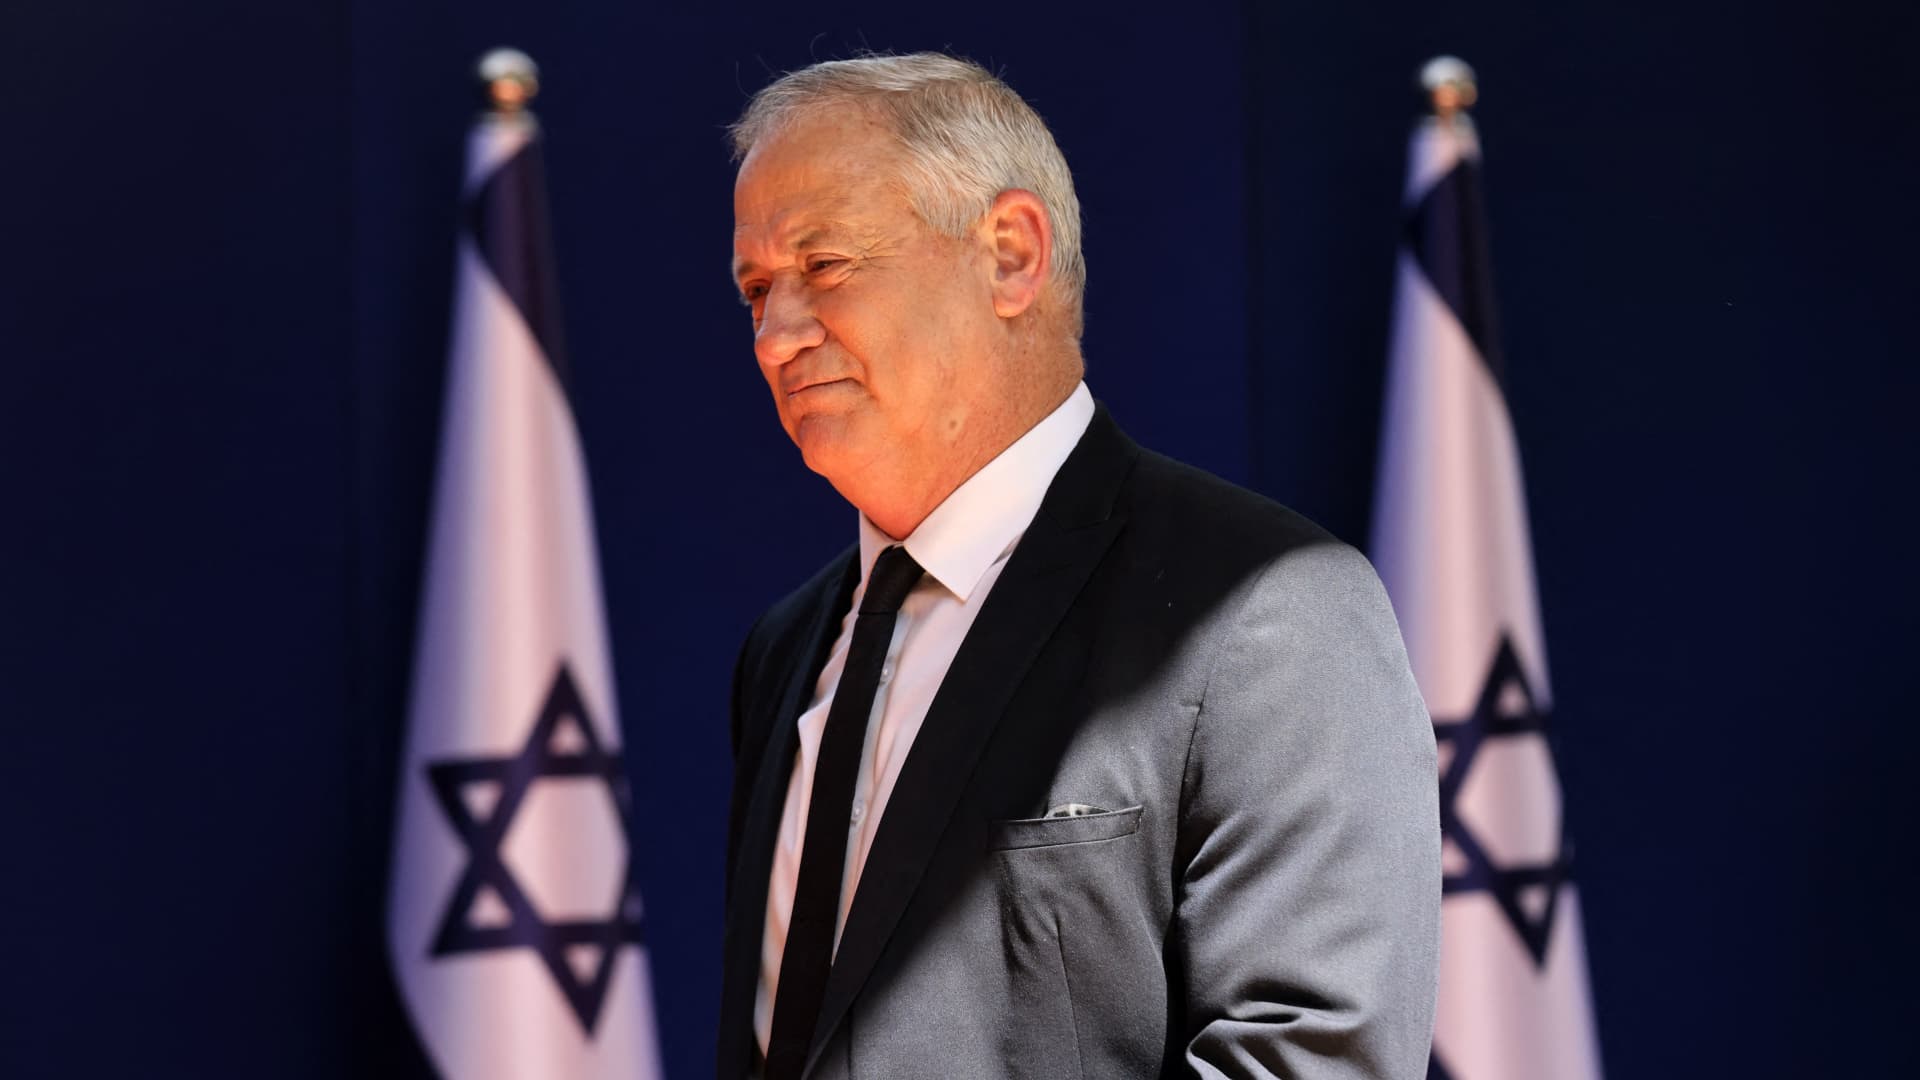 Then Israeli Minister of Defense Benny Gantz arrives for a photo at the President's residence during a ceremony for the new coalition government in Jerusalem, on June 14, 2021.